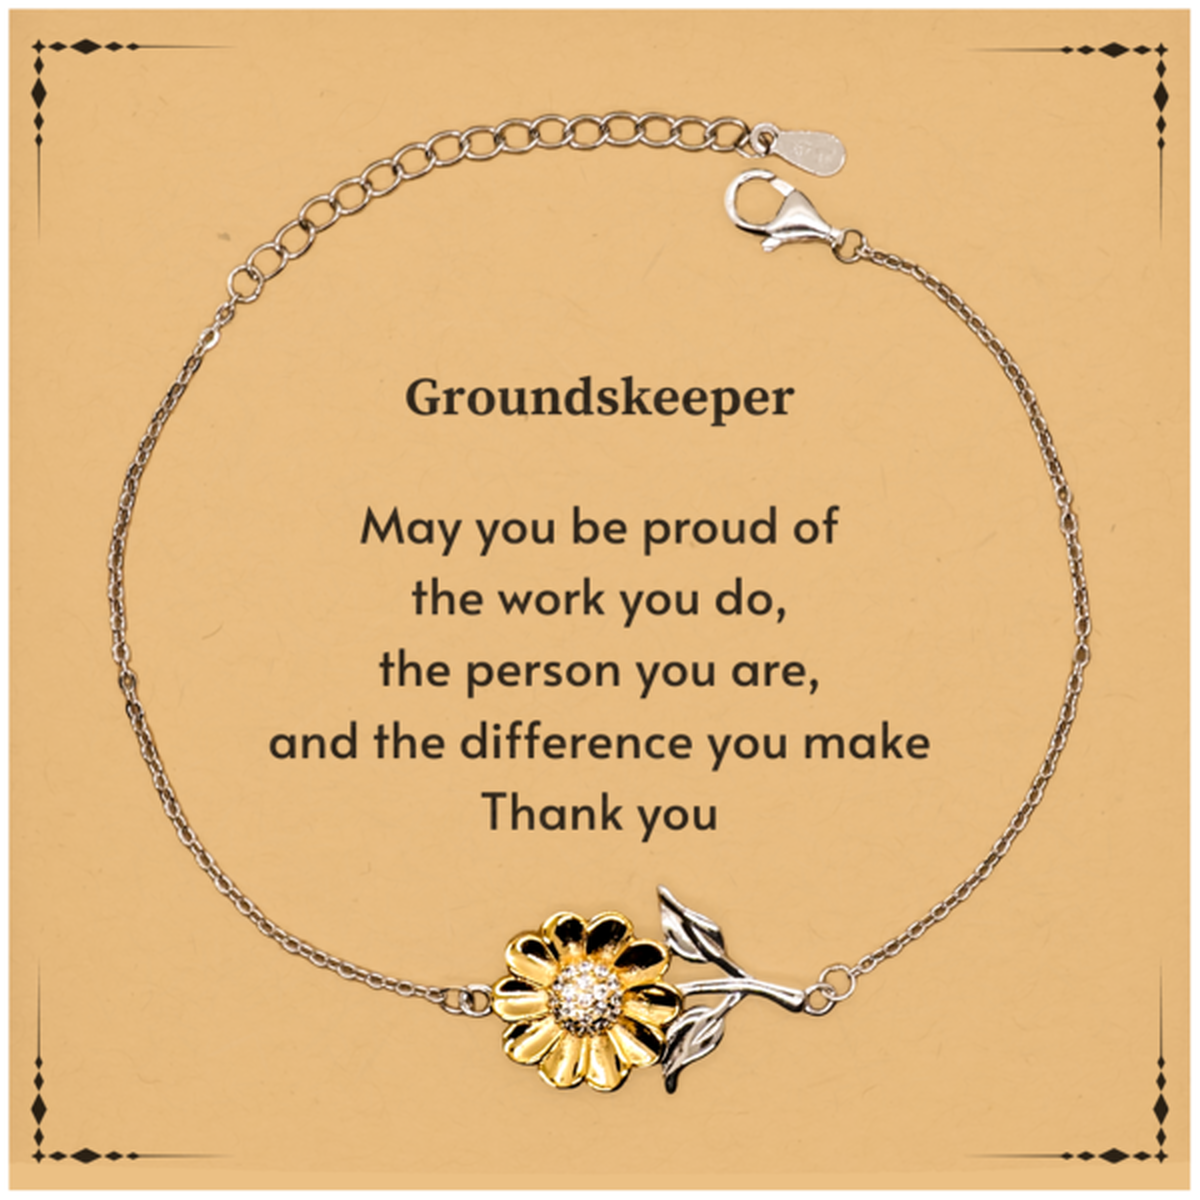 Heartwarming Sunflower Bracelet Retirement Coworkers Gifts for Groundskeeper, Groundskeeper May You be proud of the work you do, the person you are Gifts for Boss Men Women Friends